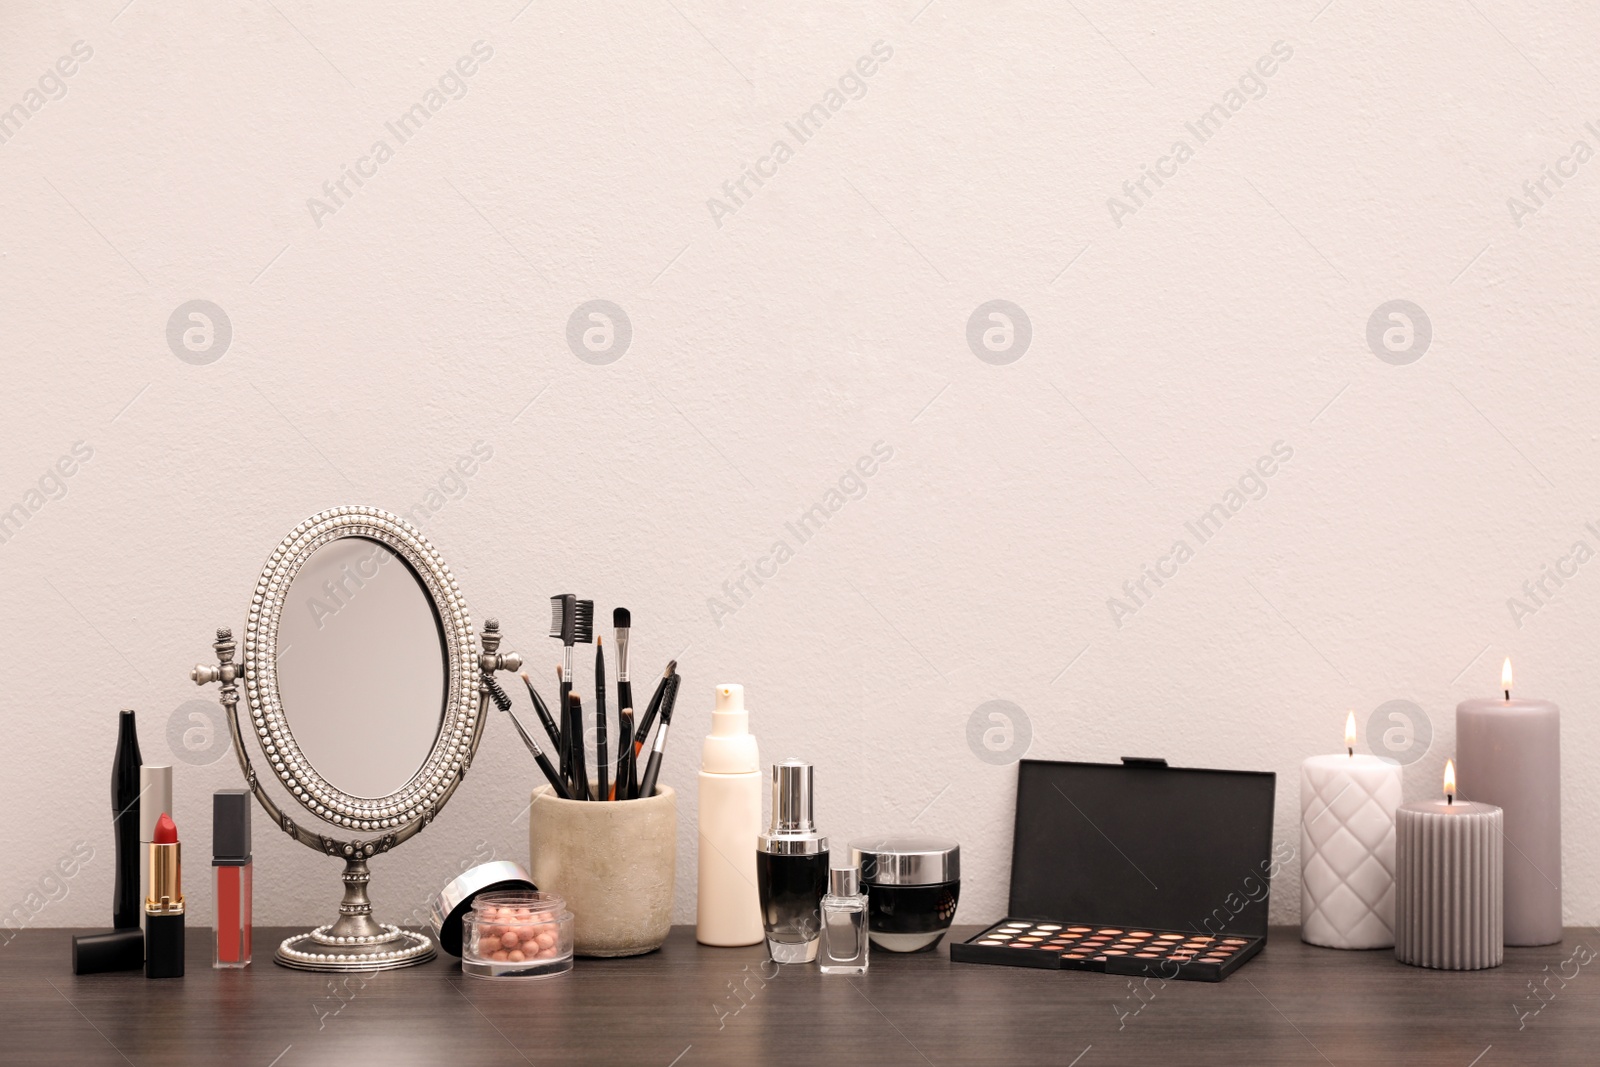 Photo of Mirror, candles and different makeup products on dark wooden dressing table near wall